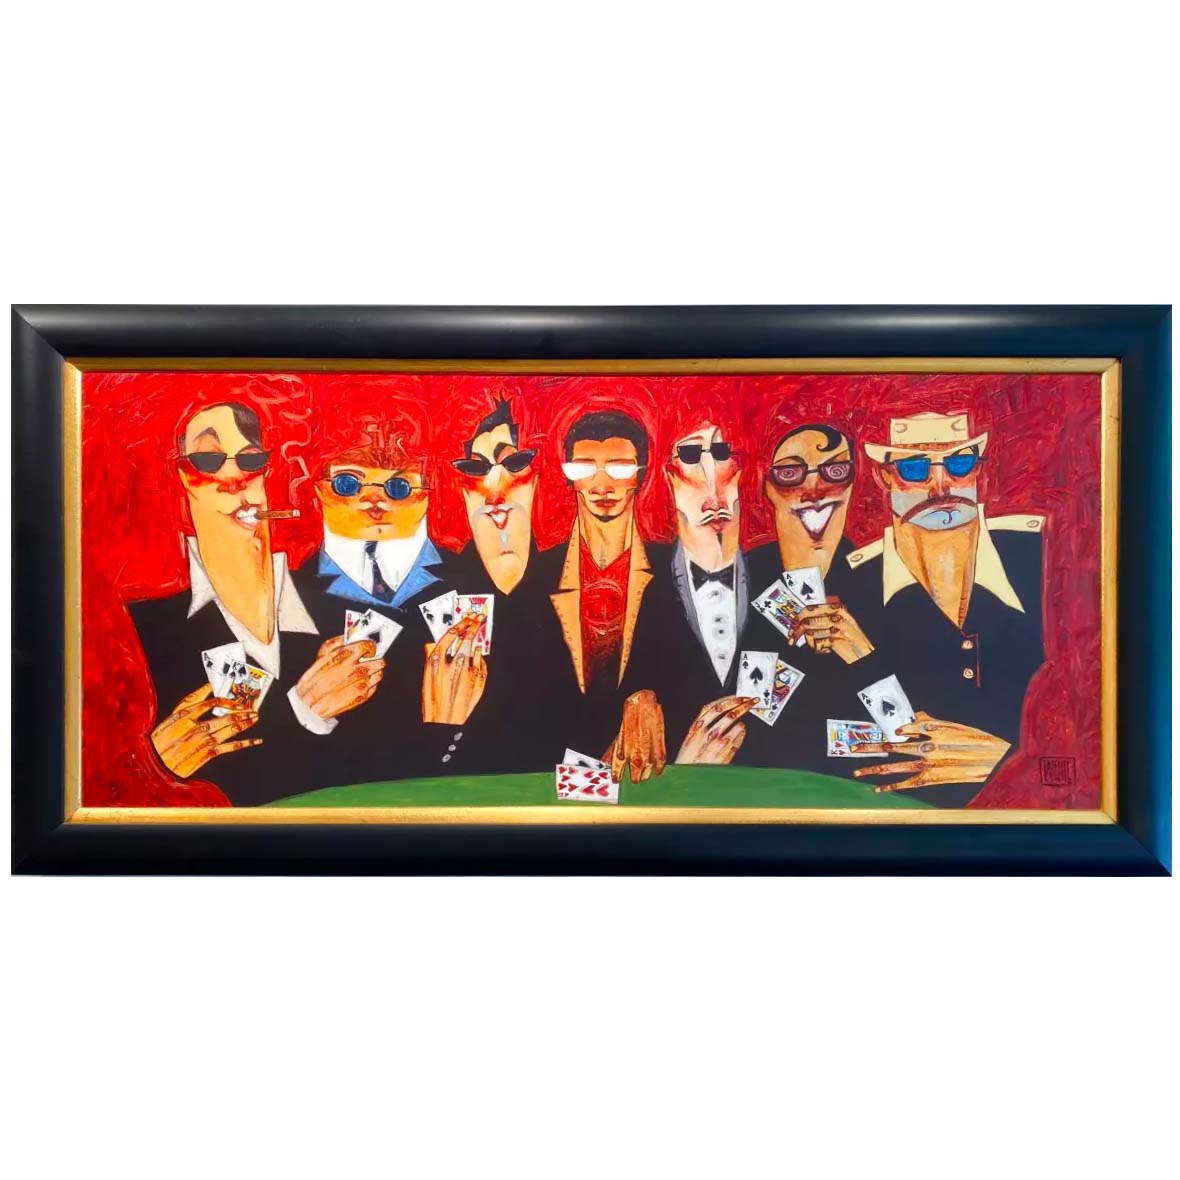 Todd White "A Shady Table" Limited Edition Canvas Giclee